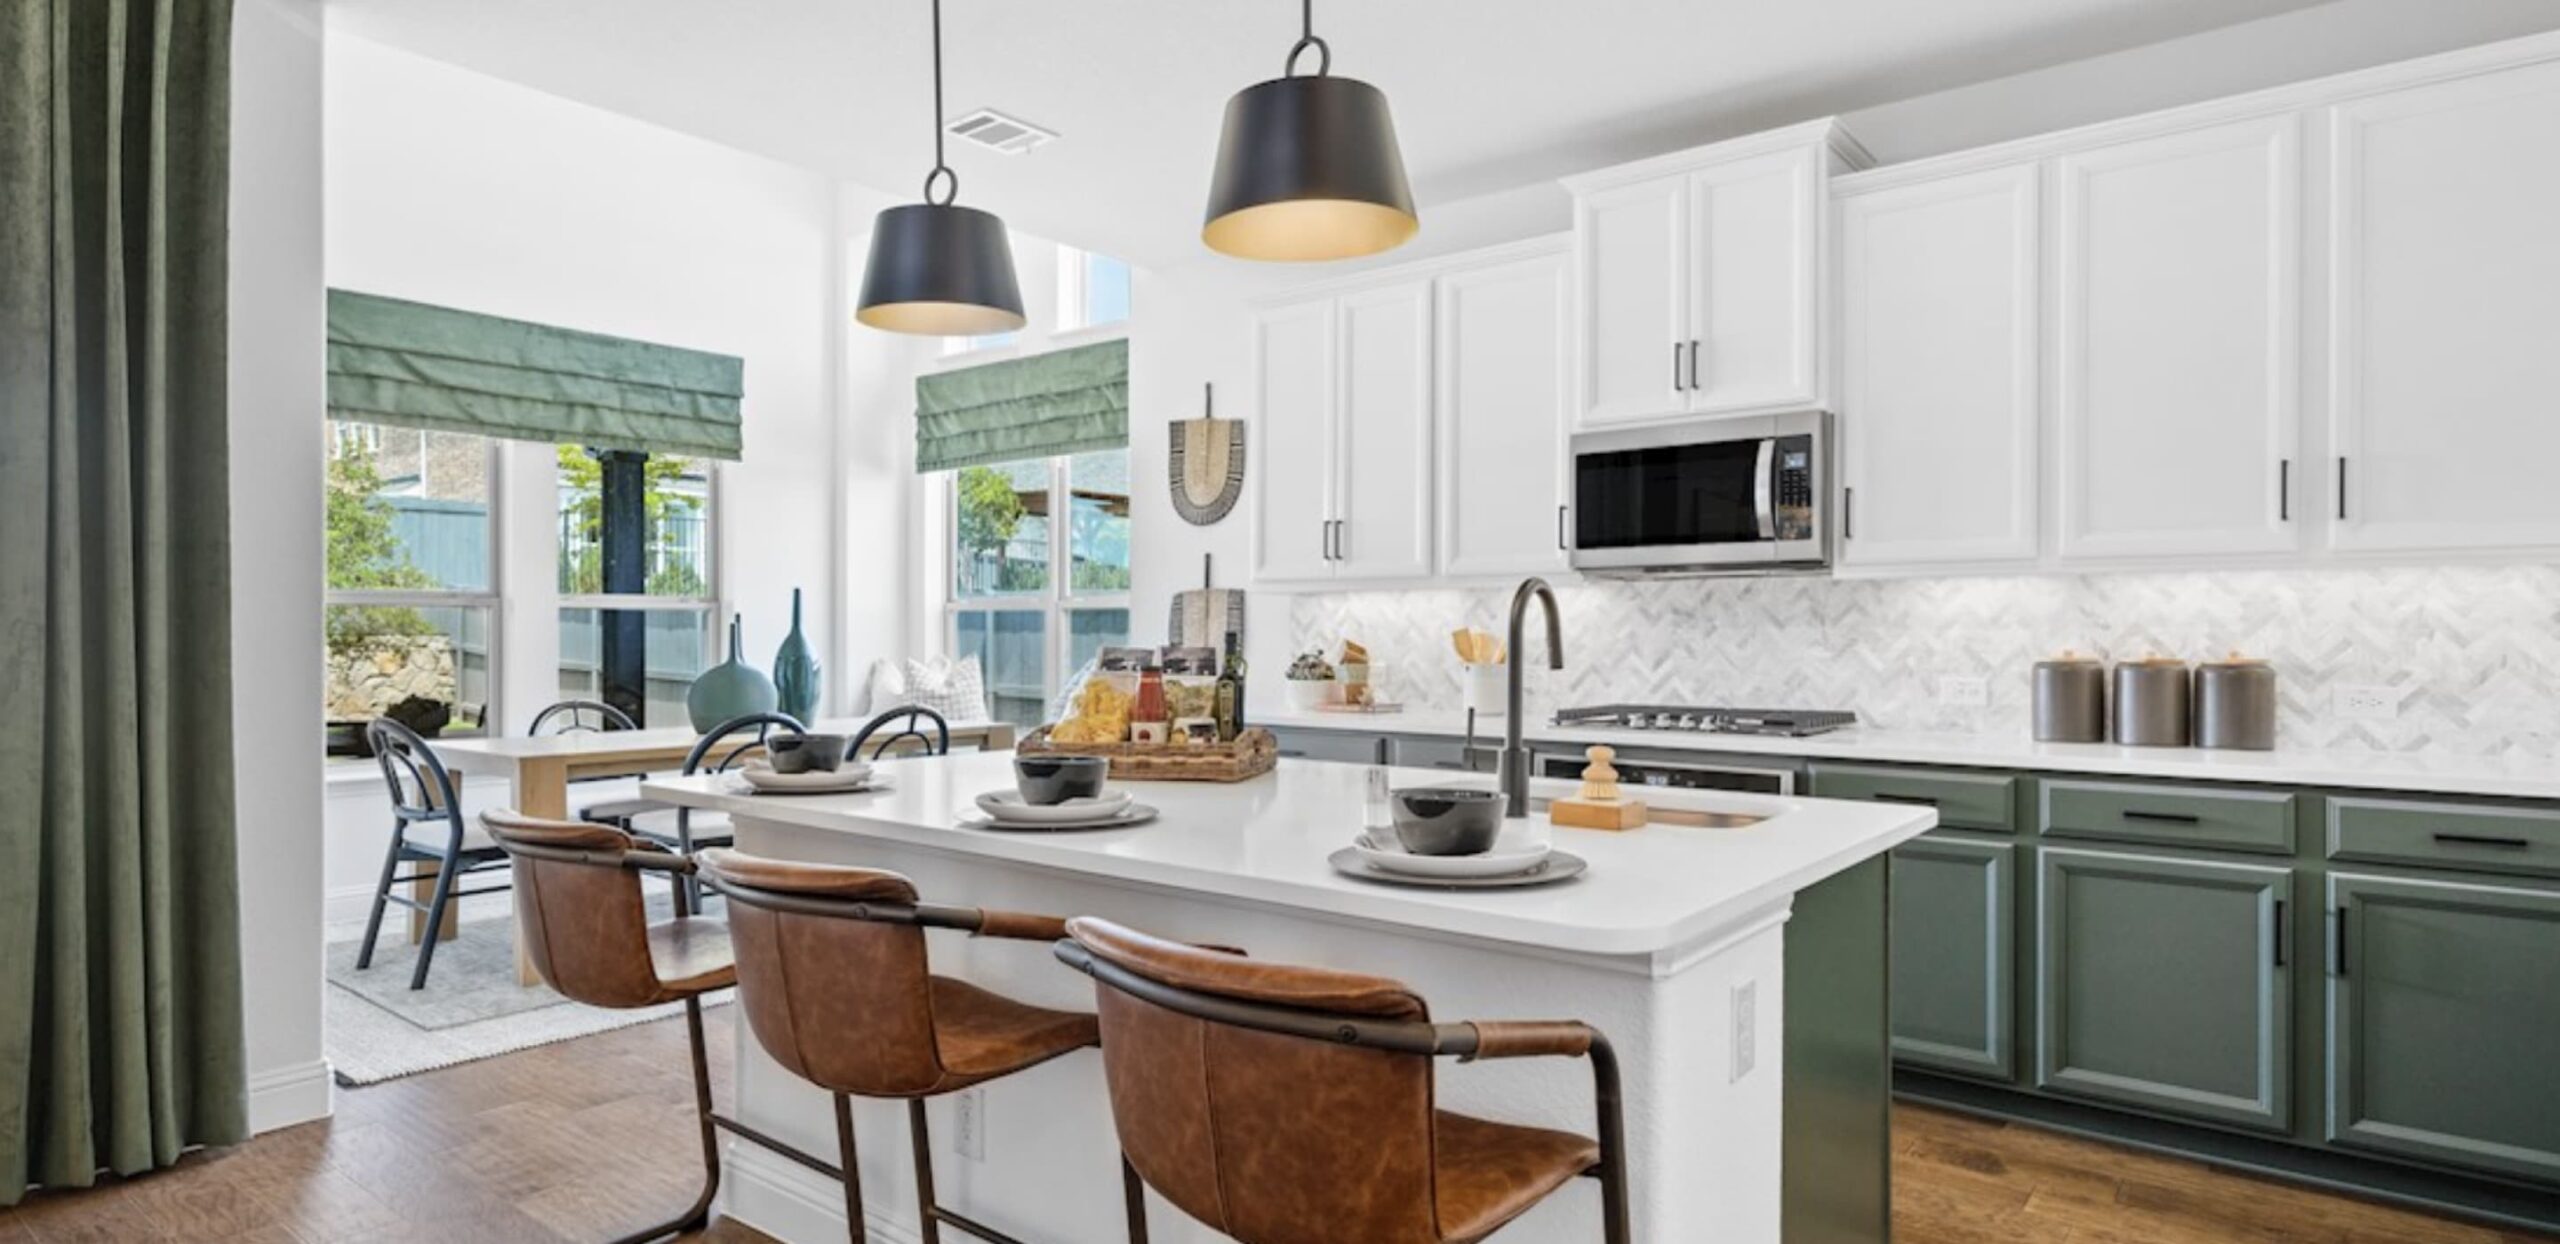 Modern kitchen in new homes in Goodland TX with white cabinets, green accents, and bar-style seating.